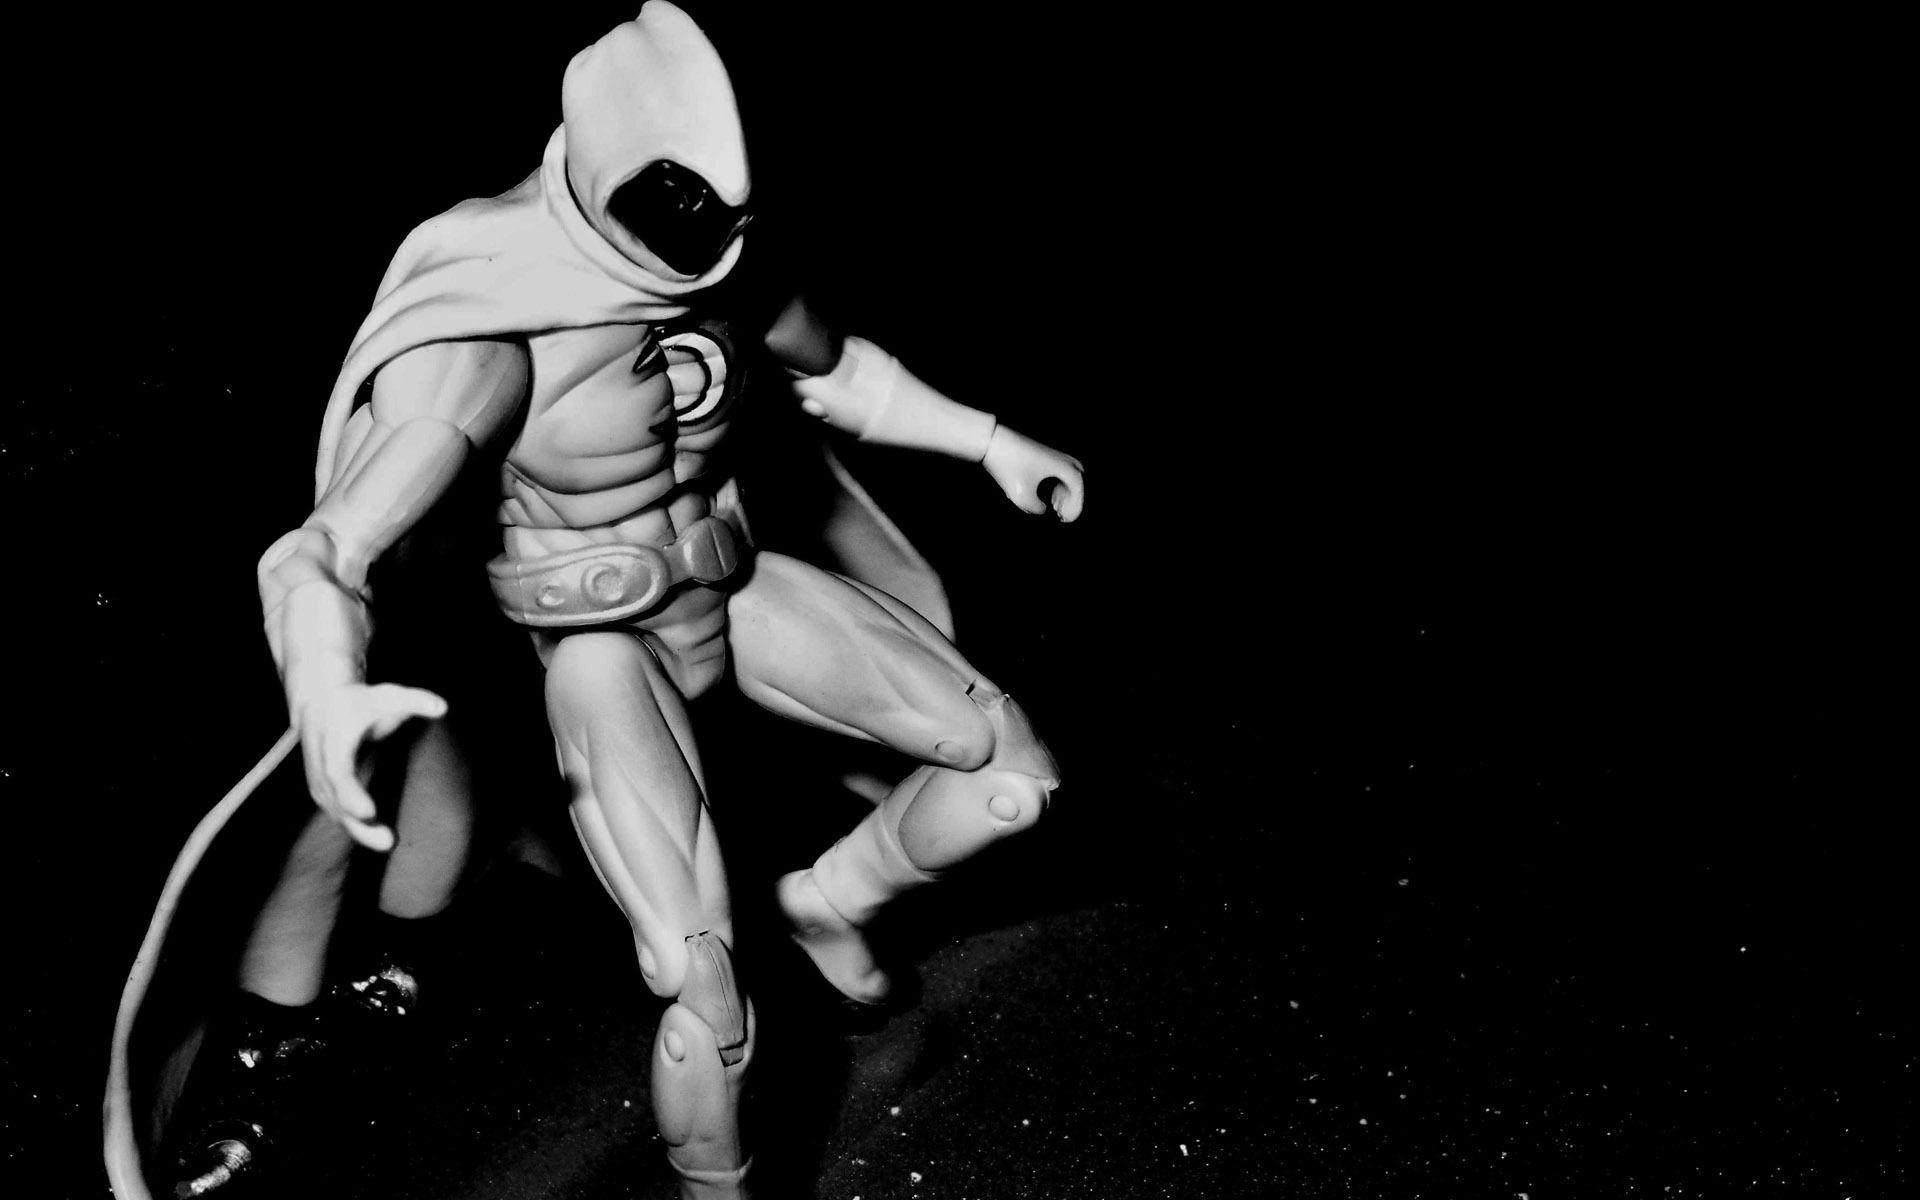 Moon Knight Wallpaper HD 4k for iPhone, Laptop